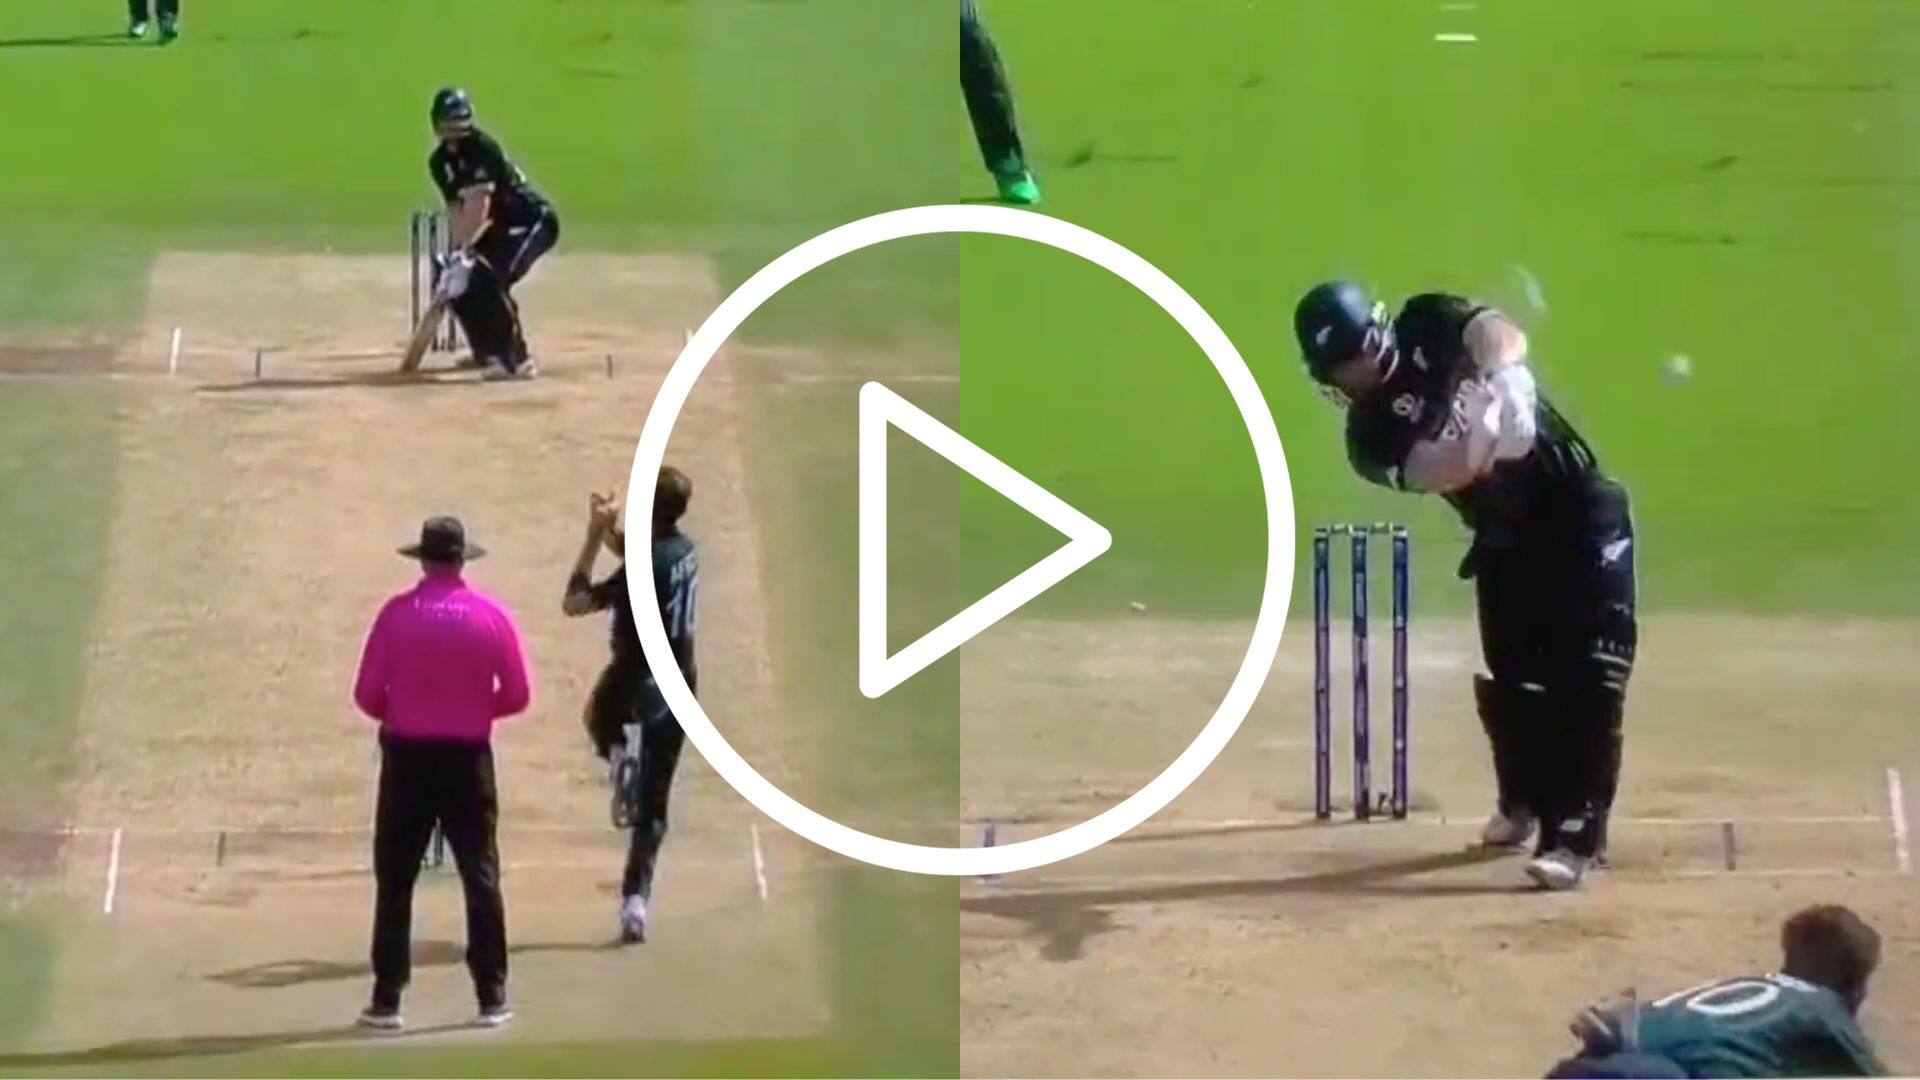 [Watch] Glenn Phillips ‘Hammers’ Shaheen Afridi As Low Full Toss Goes For 'Handsome' Six